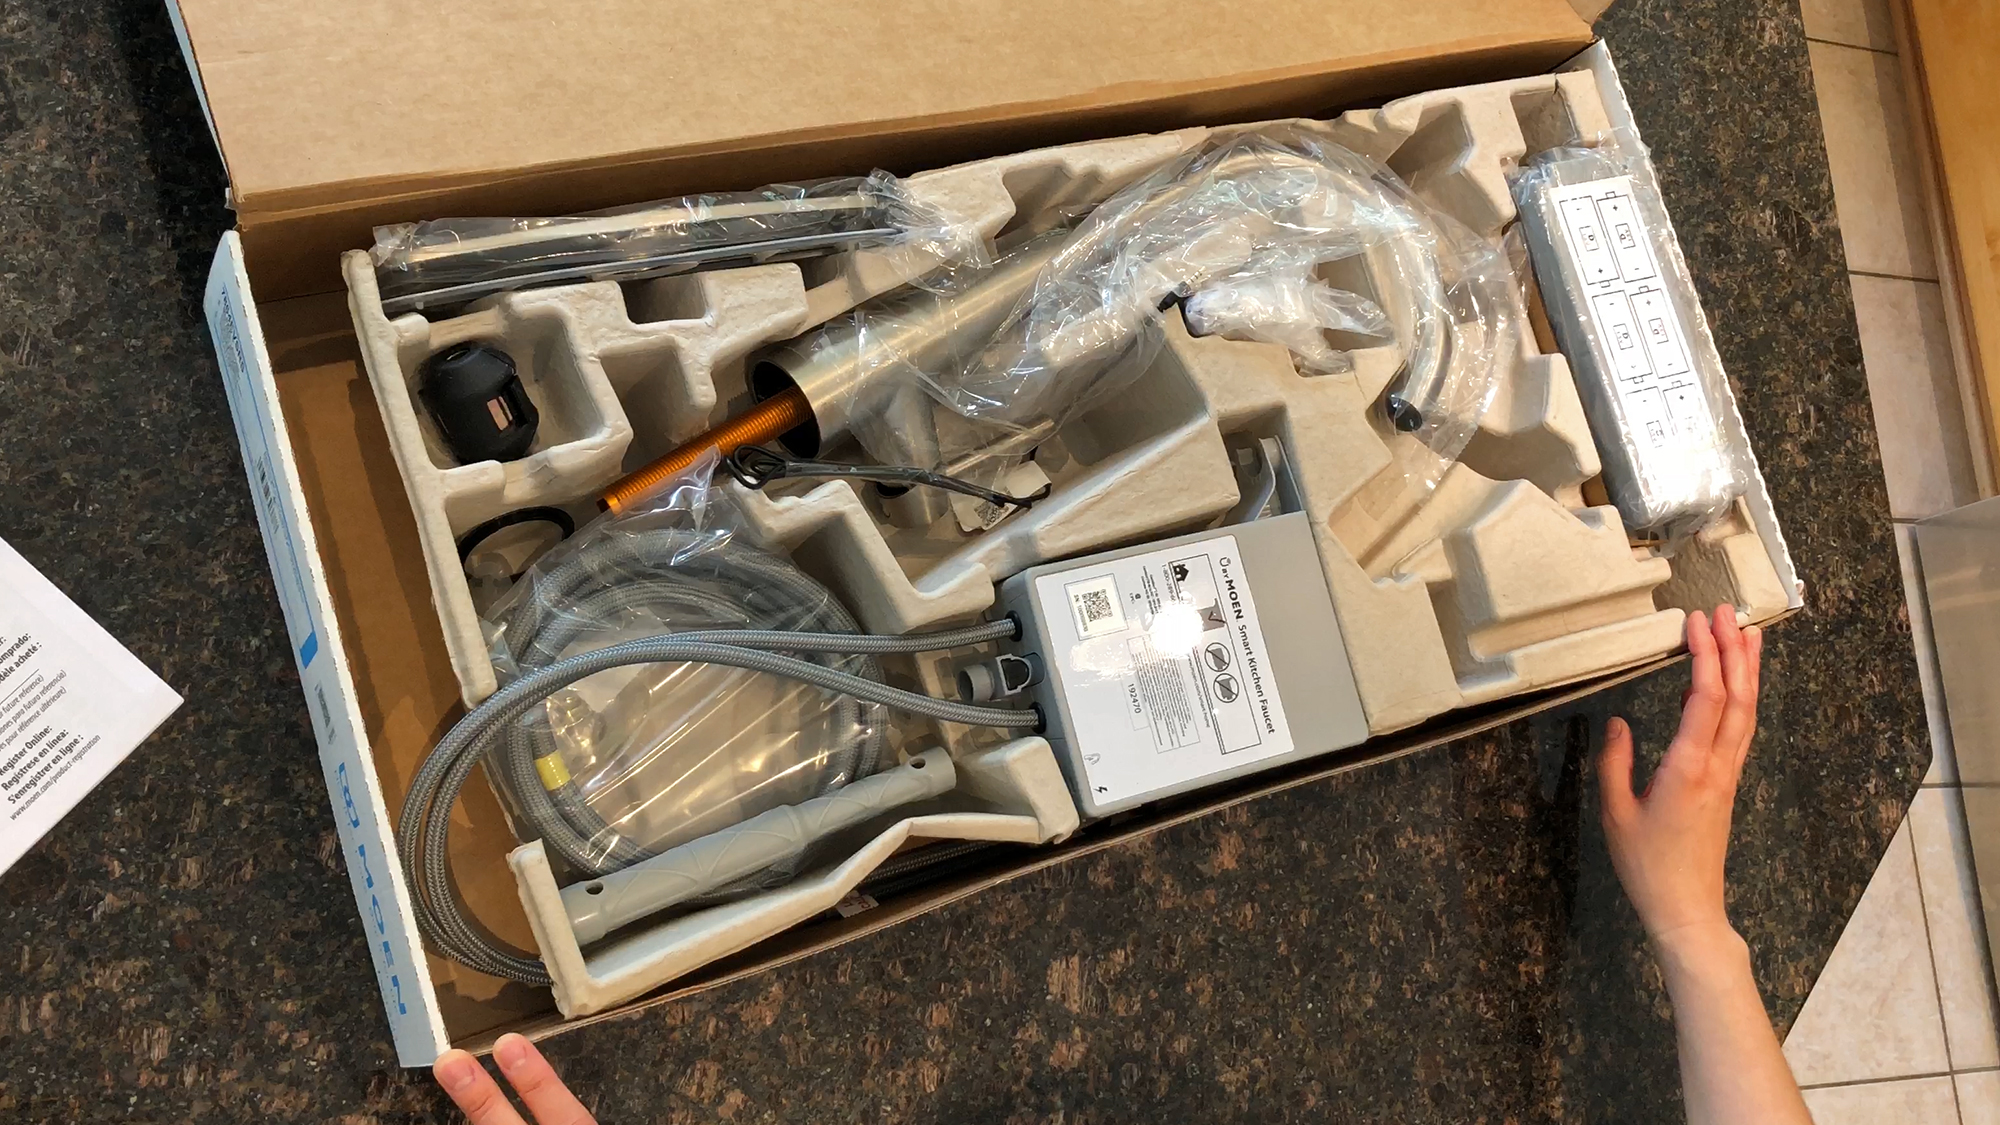 Having never installed a faucet before the U by Moen Smart Faucet seemed like a daunting task when I first opened the box. (Photo: Andrew Liszewski/Gizmodo)